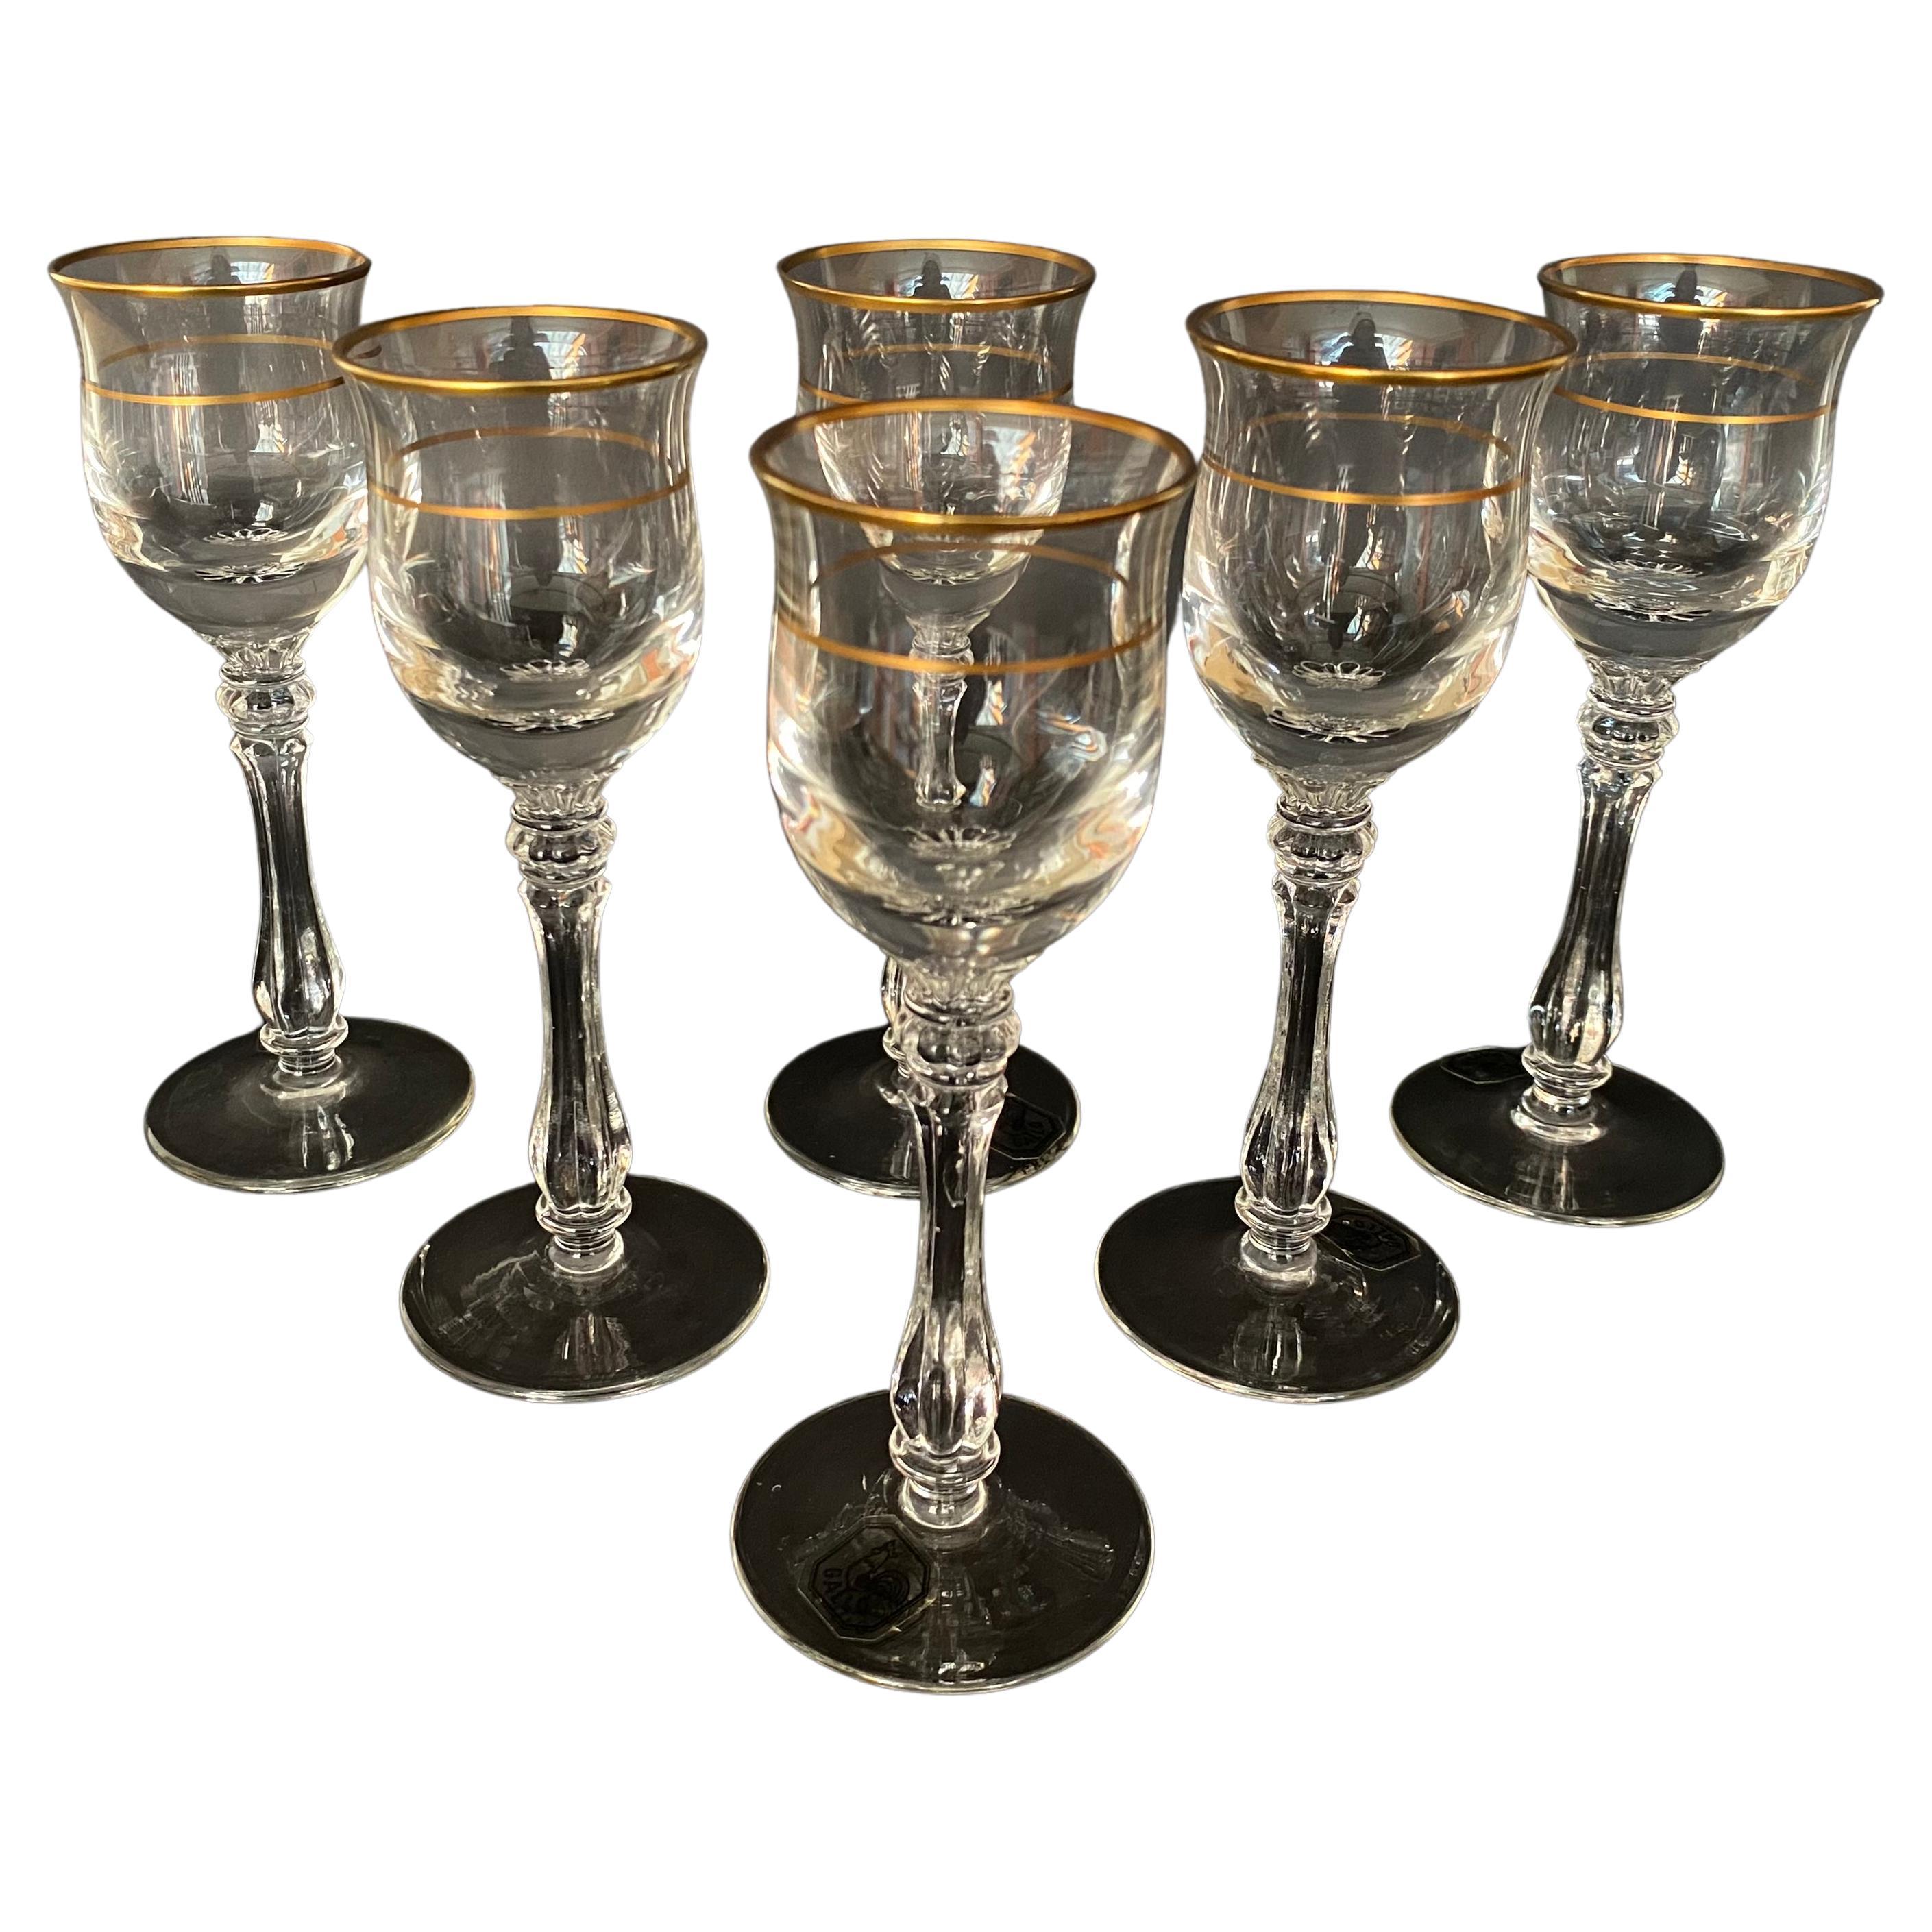 Gorgeous Crystal Shot Glasses set by German manufactory Gallo. Around 1970s.

Products are equipped with high legs and are designed to serve vodka, liquor or cognac.

The glasses are handcut and munge blown. Elegant and precise work of art.